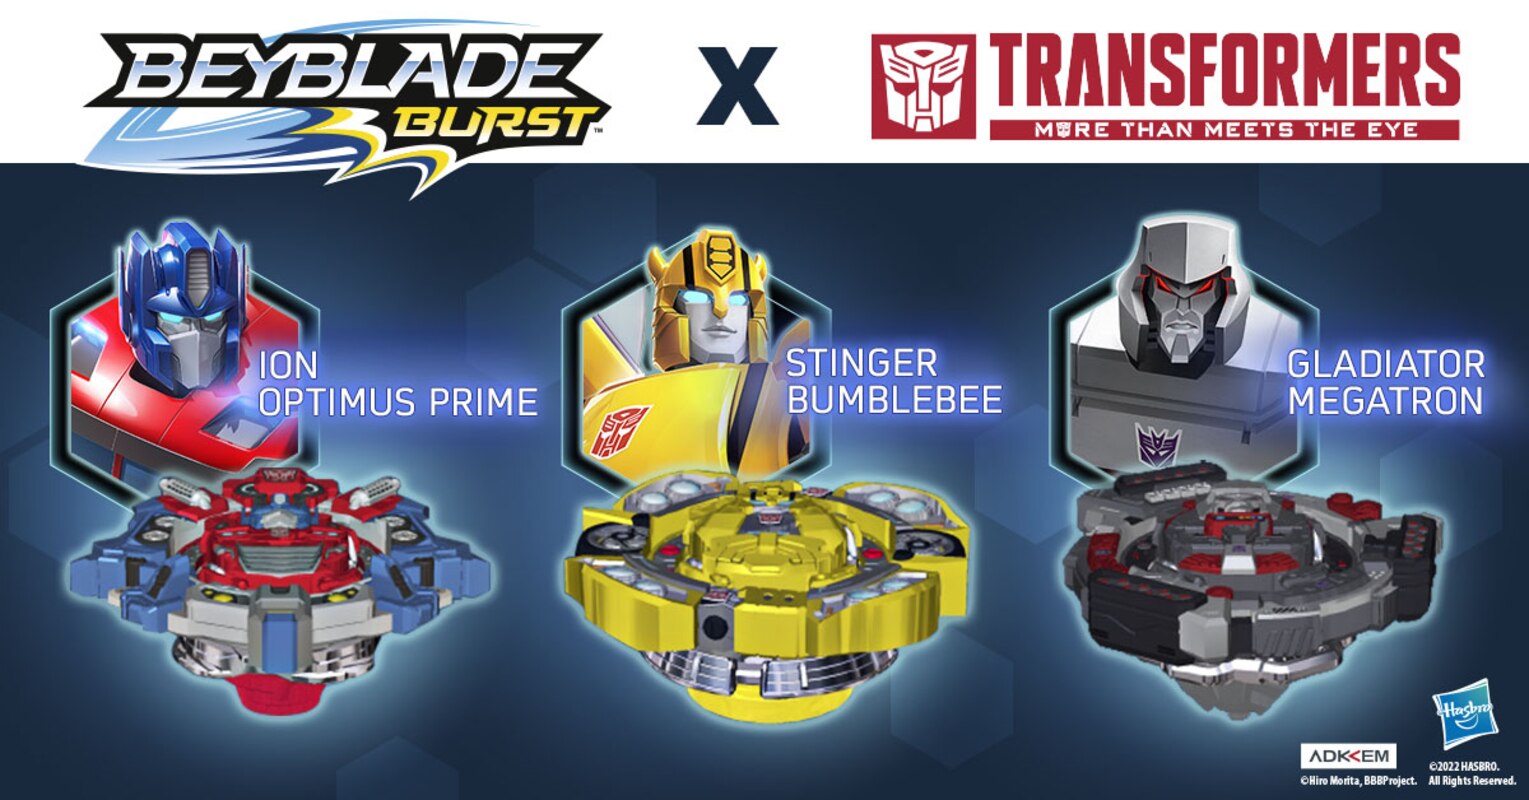 Transformers X Beyblade Burst Crossover - Megatron, Optimus Prime, More Than Meets the TOPS!